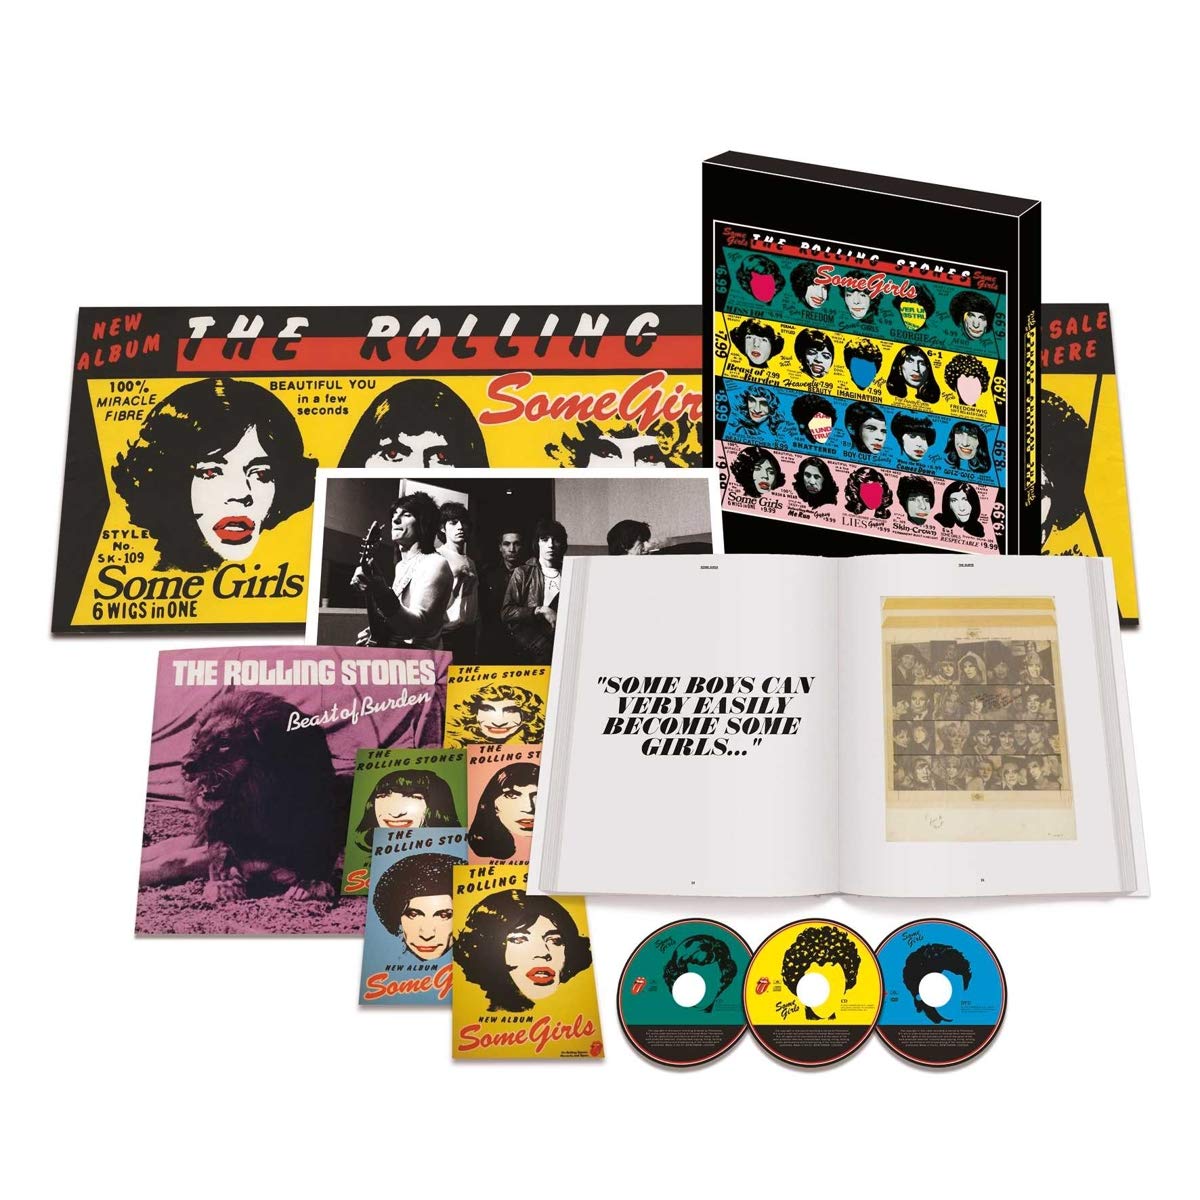 The Rolling Stones / Some Girls super deluxe edition